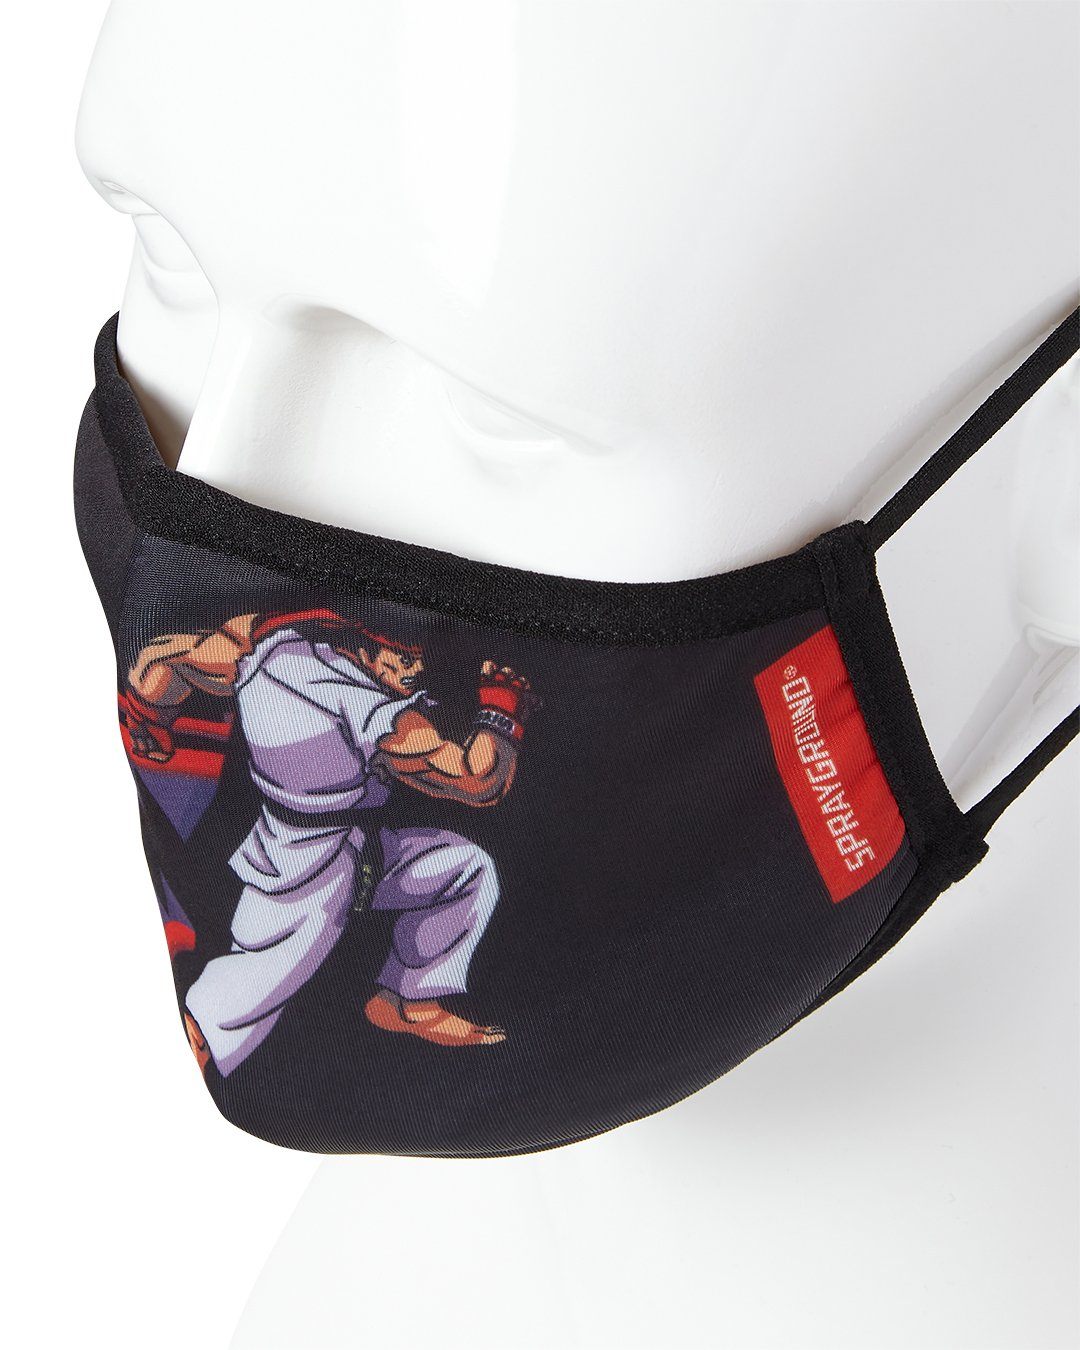 SPRAYGROUND® FASHION MASK ADULT STREET FIGHTER RYU SHARK FORM FITTING FACE-COVERING